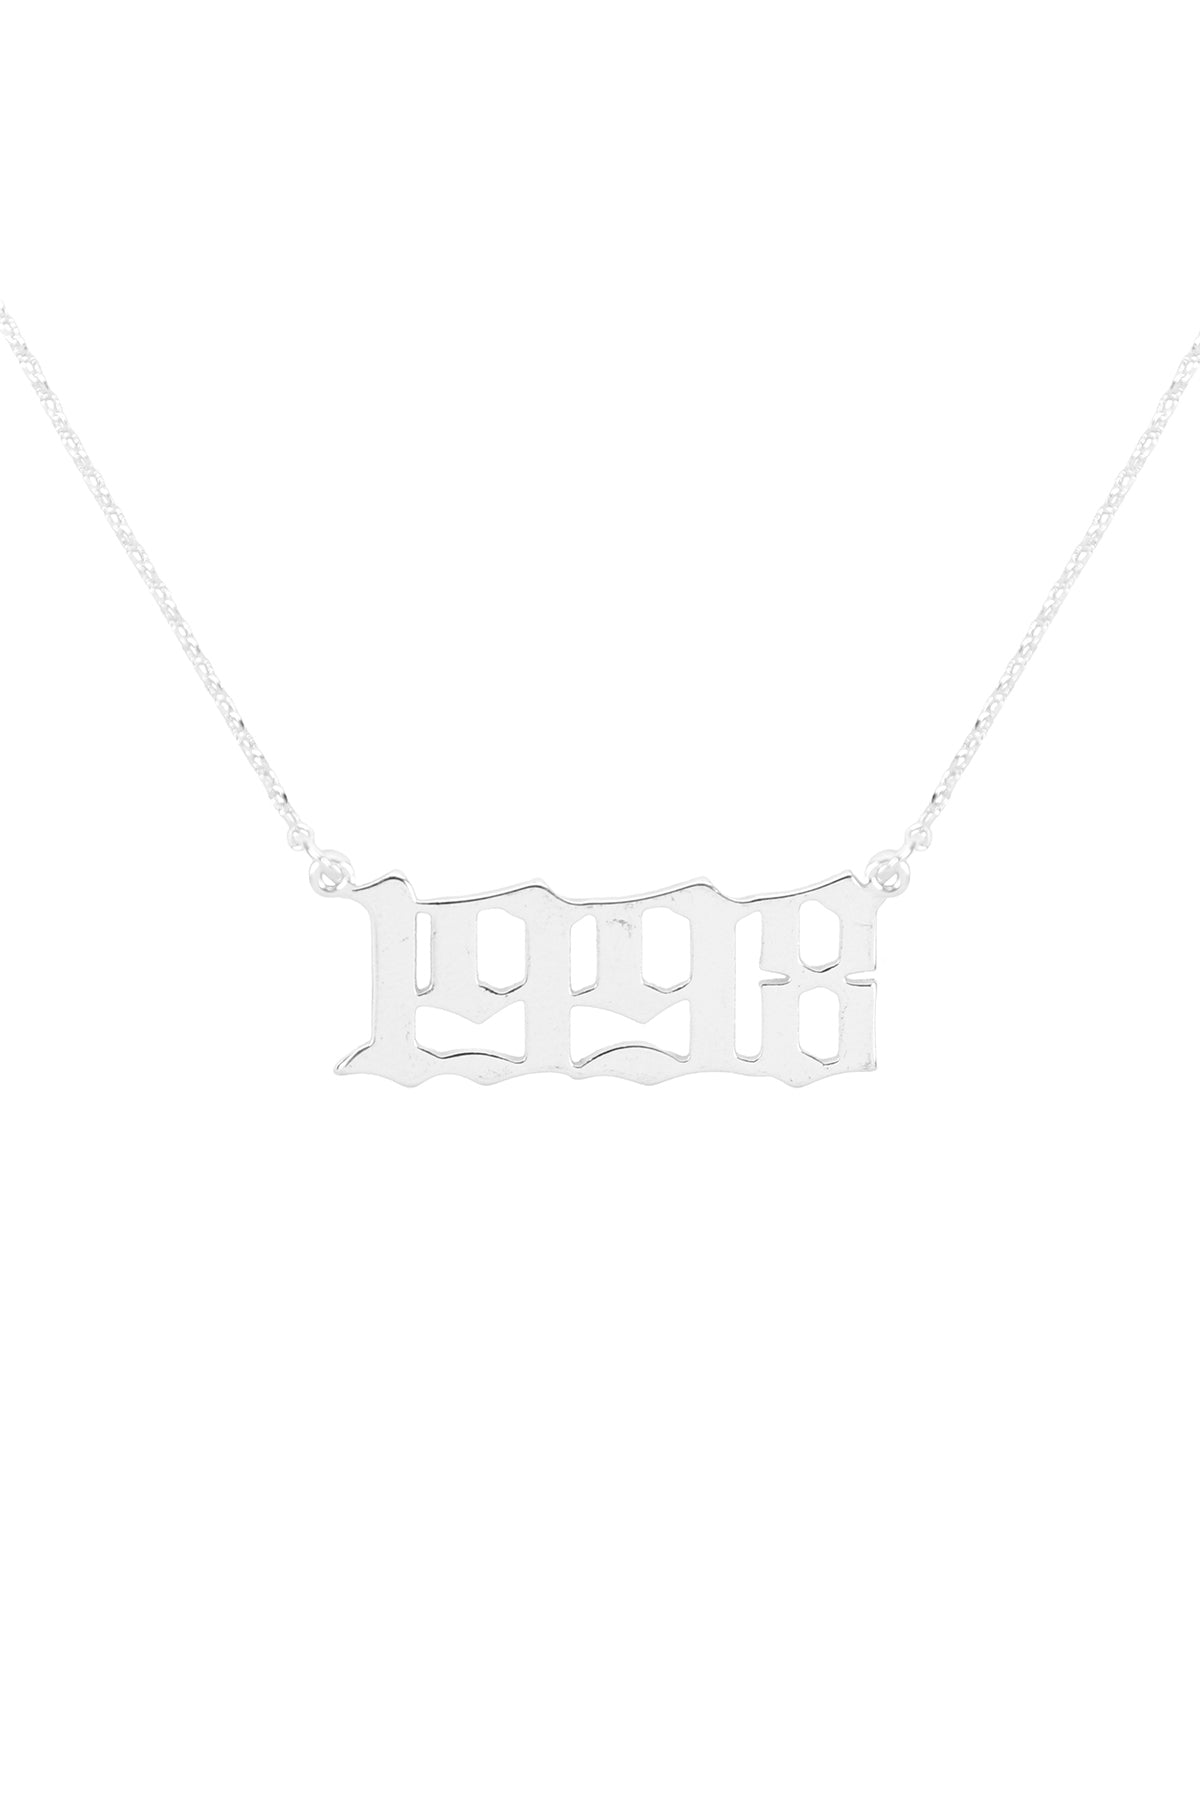 "1998" BIRTH YEAR PERSONALIZED NECKLACE